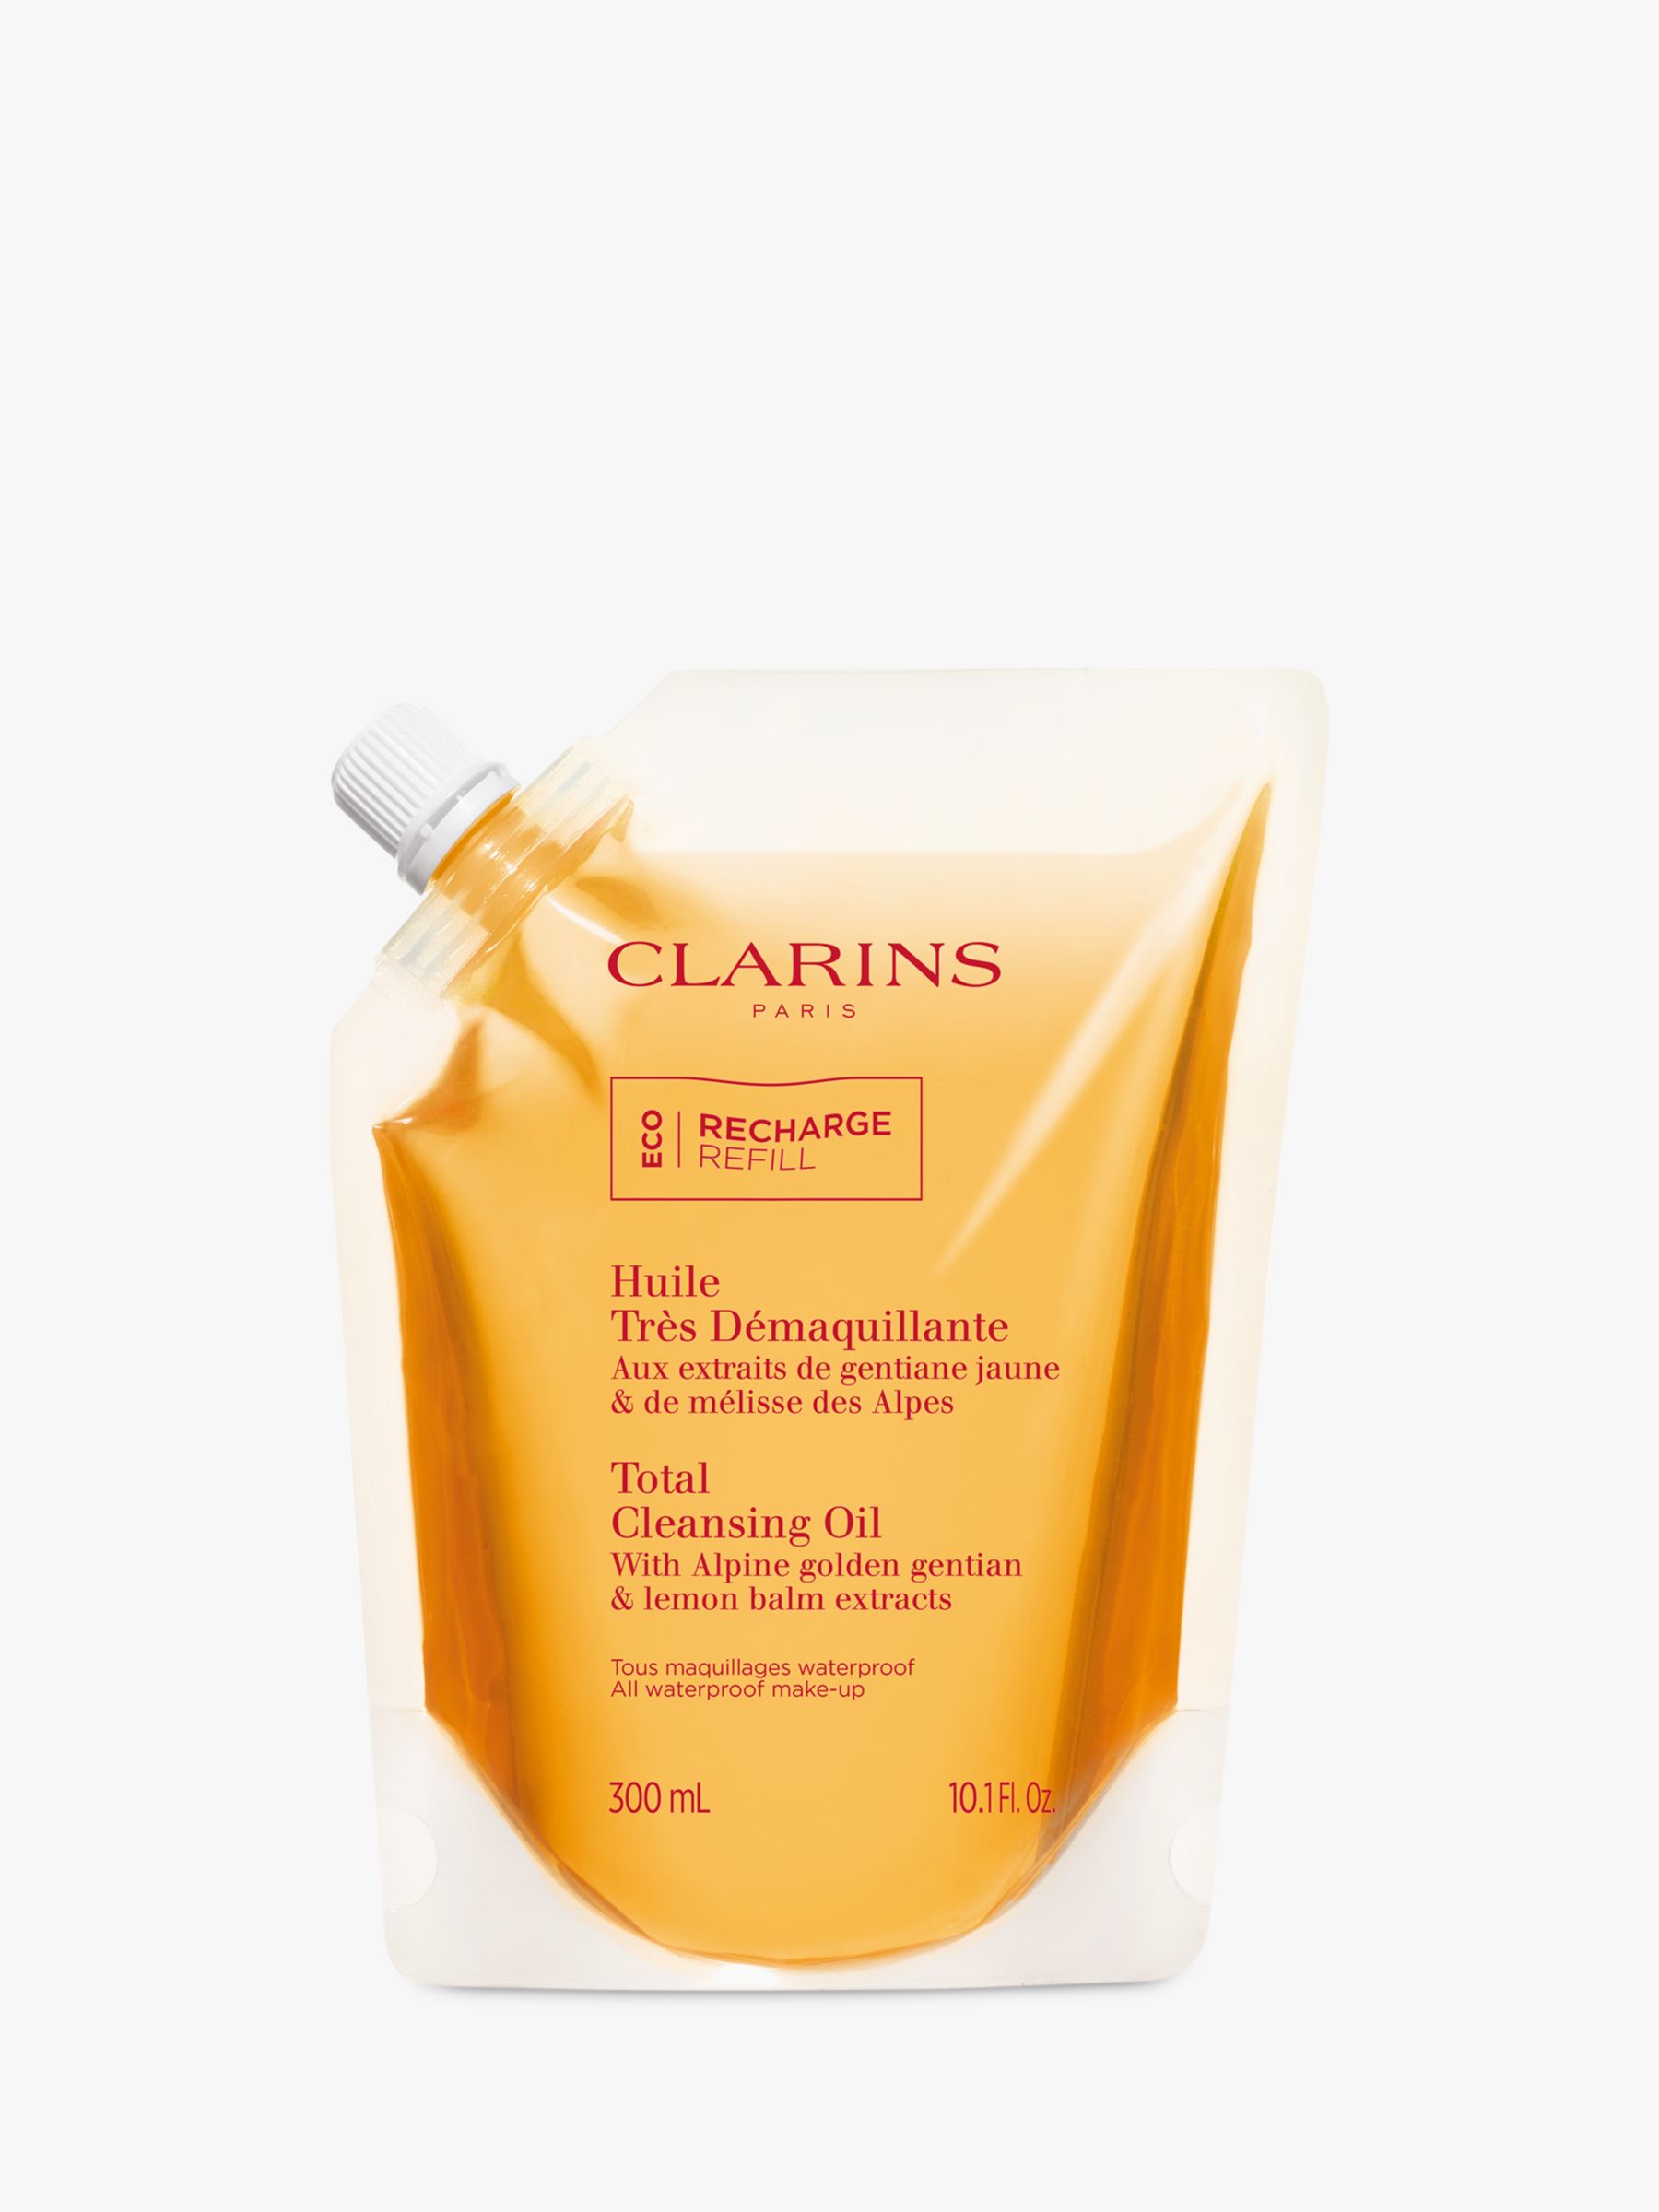 Clarins Total Cleansing Oil Refill, 300ml 1